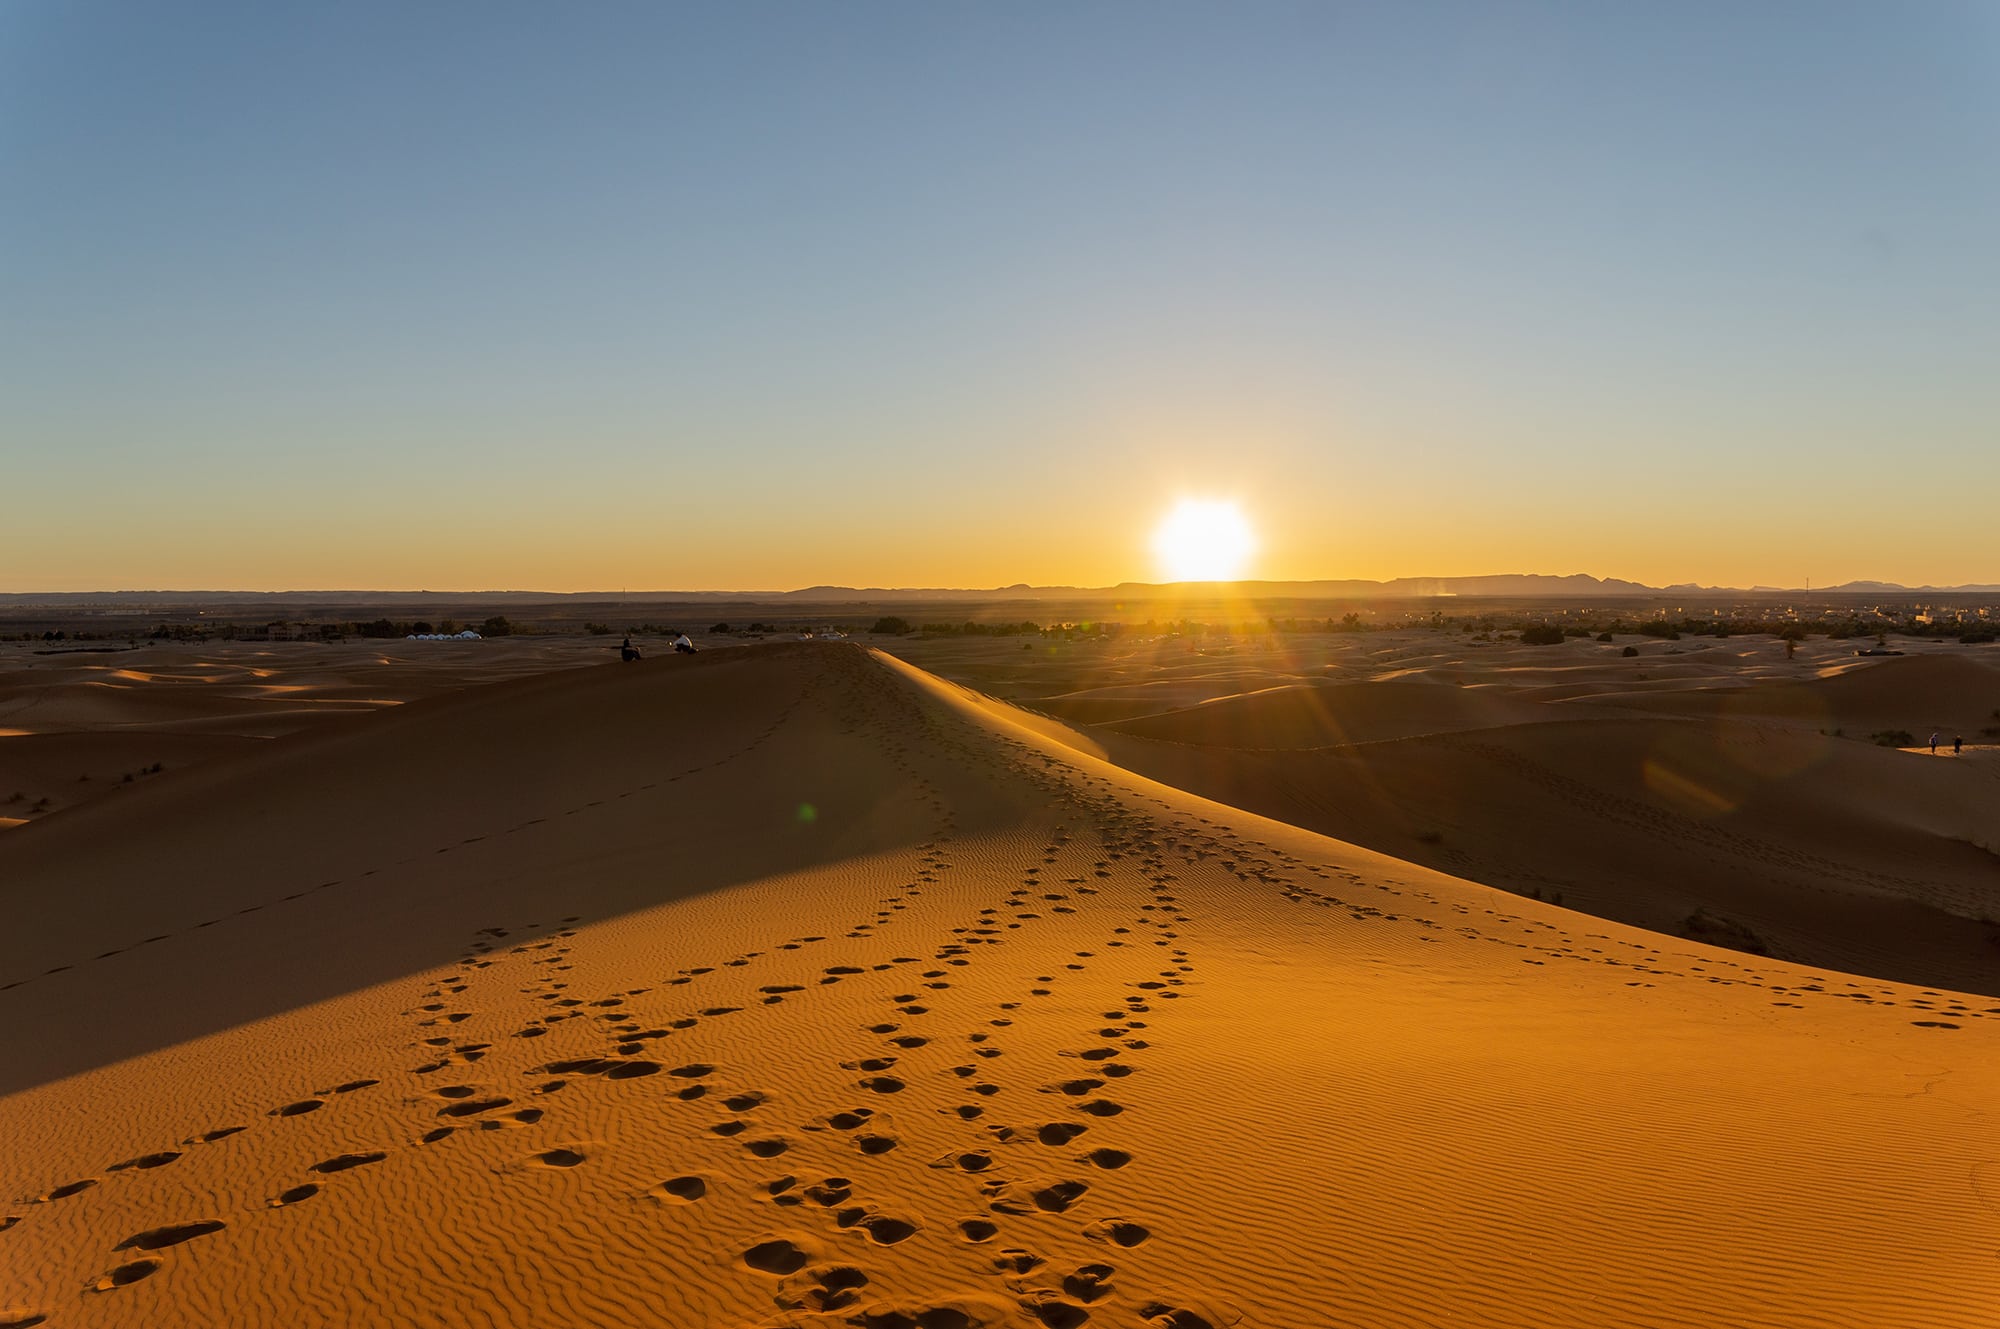 A trail of footsteps crossing a dune with sun on horizon.